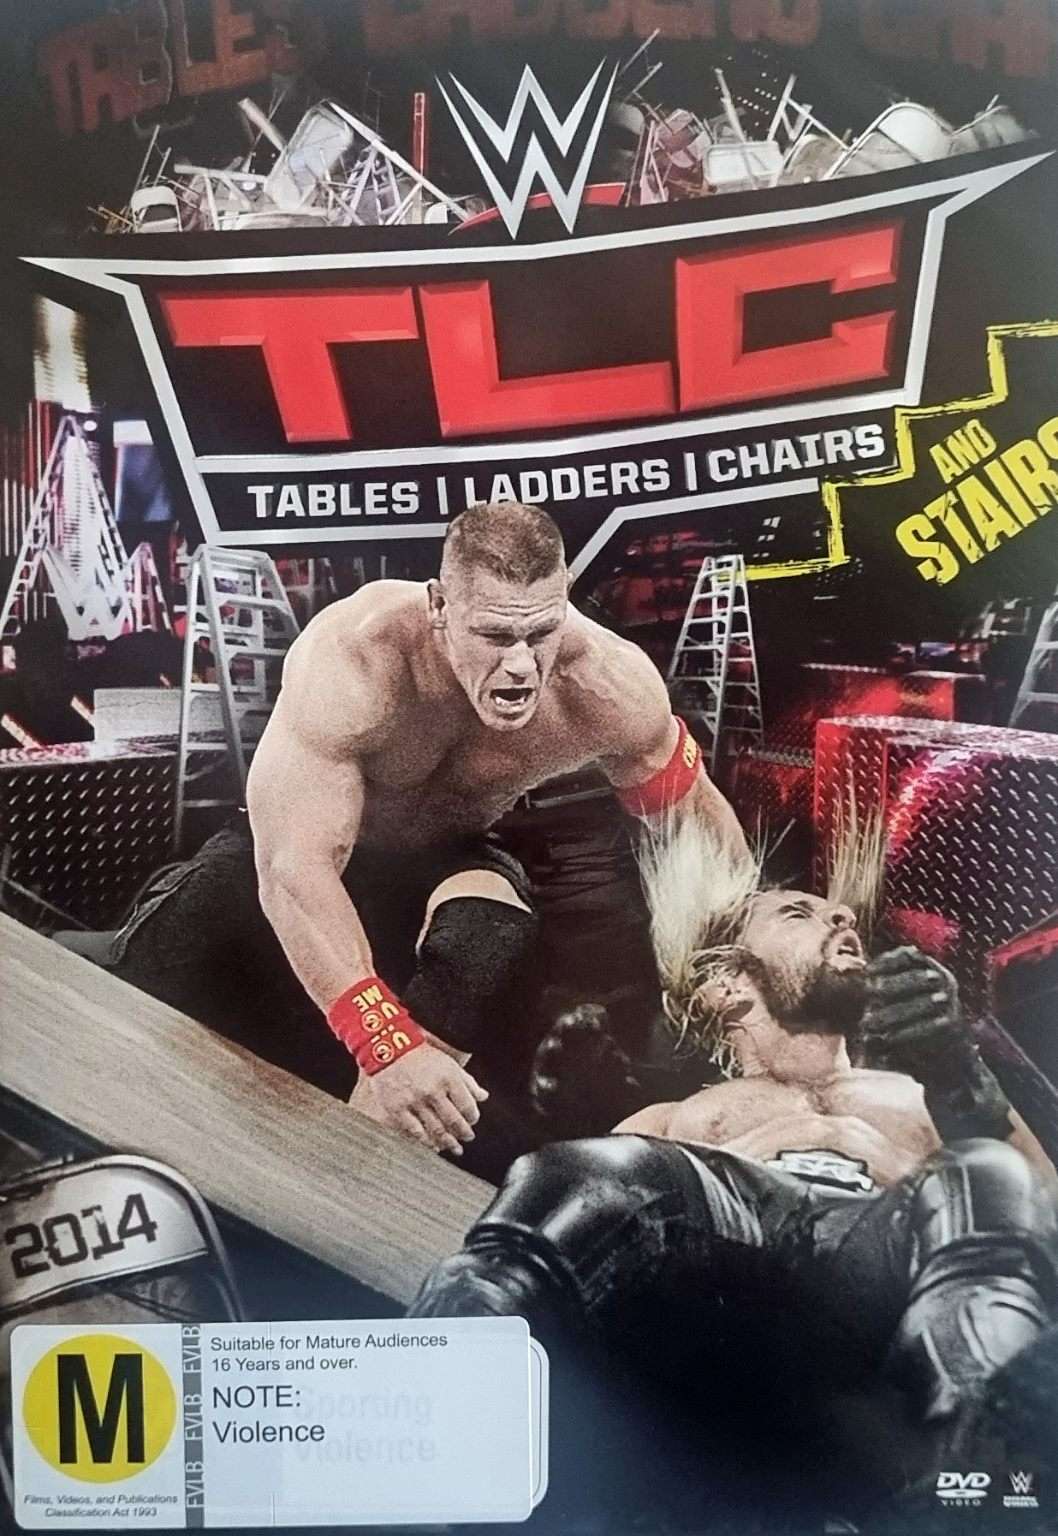 WWE: TLC Tables, Ladders, Chairs 2014